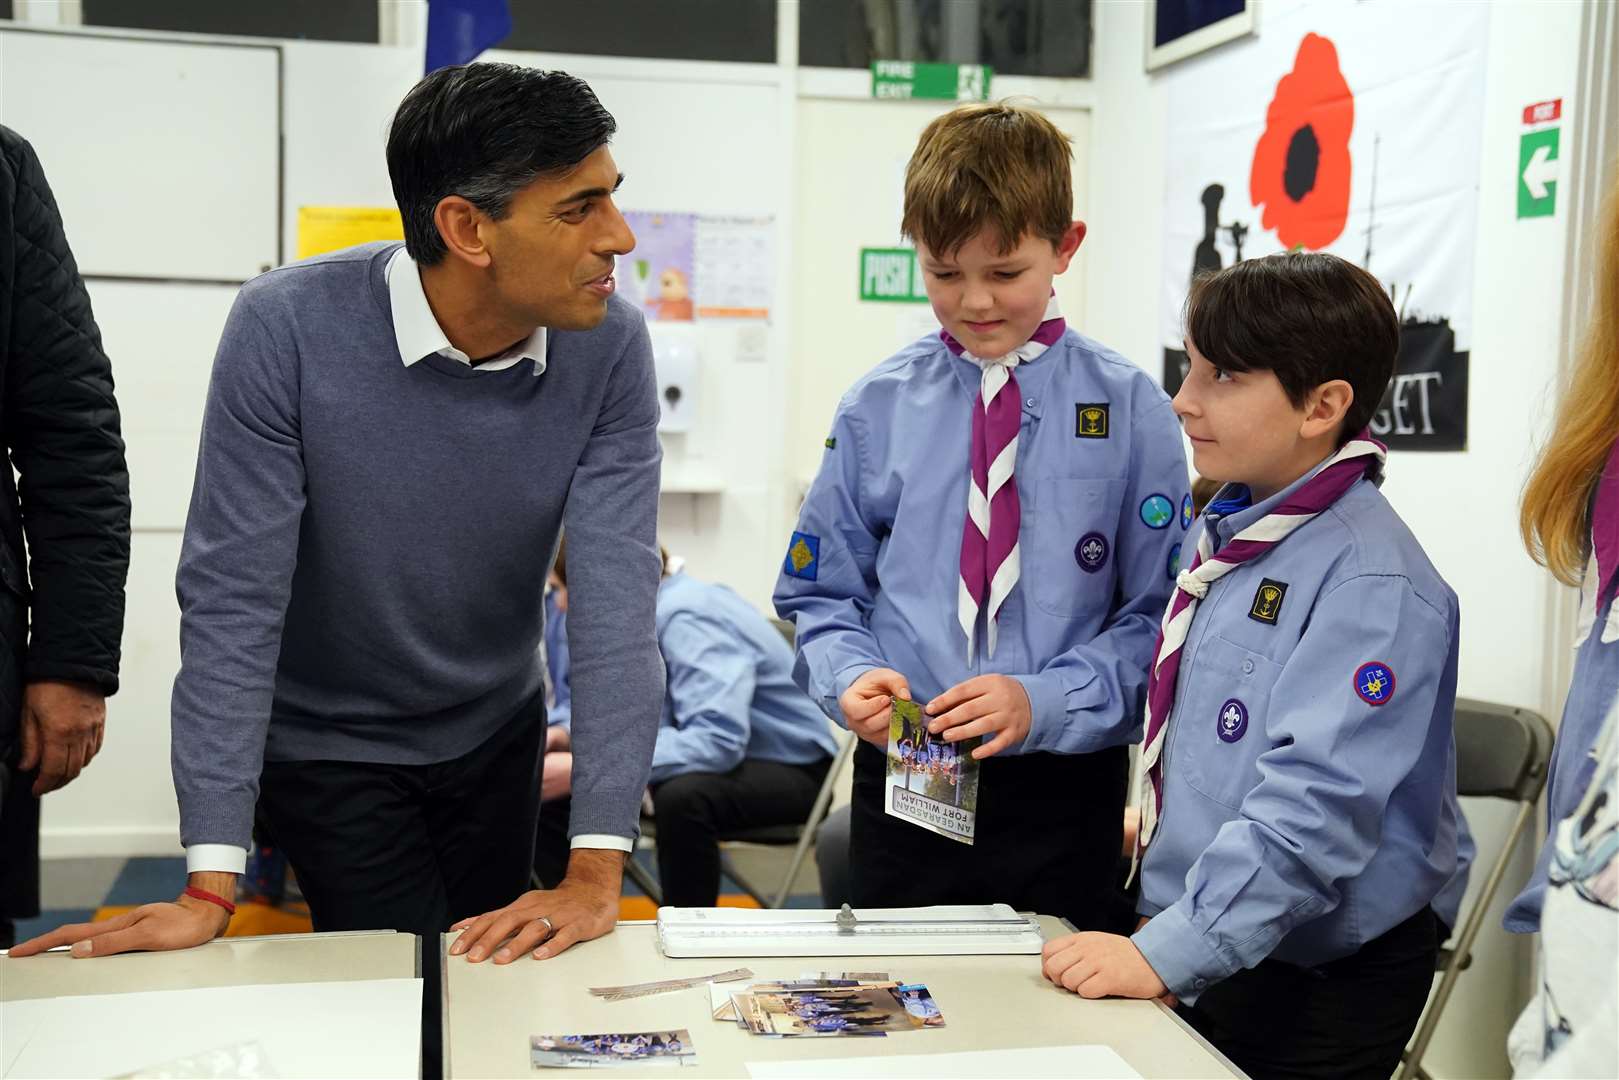 Rishi Sunak visited the Sea scouts community group in Muirtown, near Inverness, as part of his visit to Scotland (Andrew Milligan/PA)